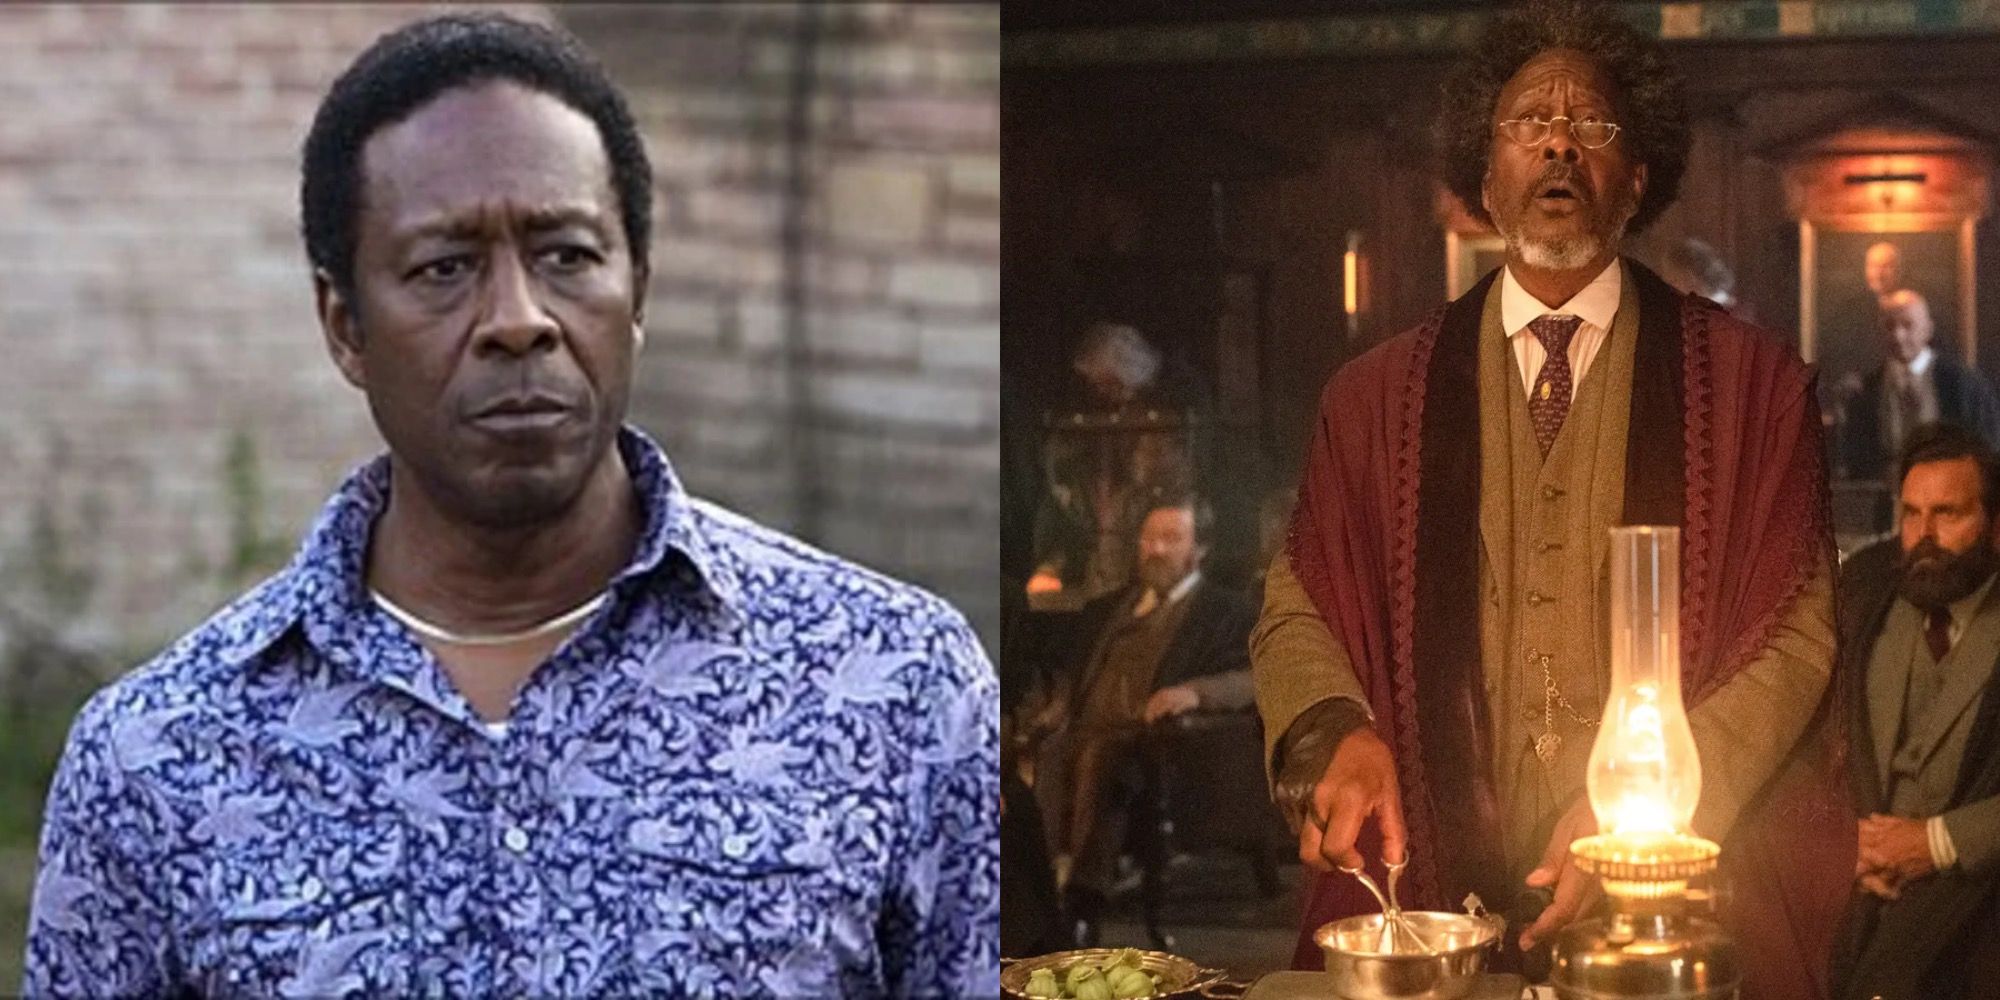 Clarke Peters in The Wire and True Detective 